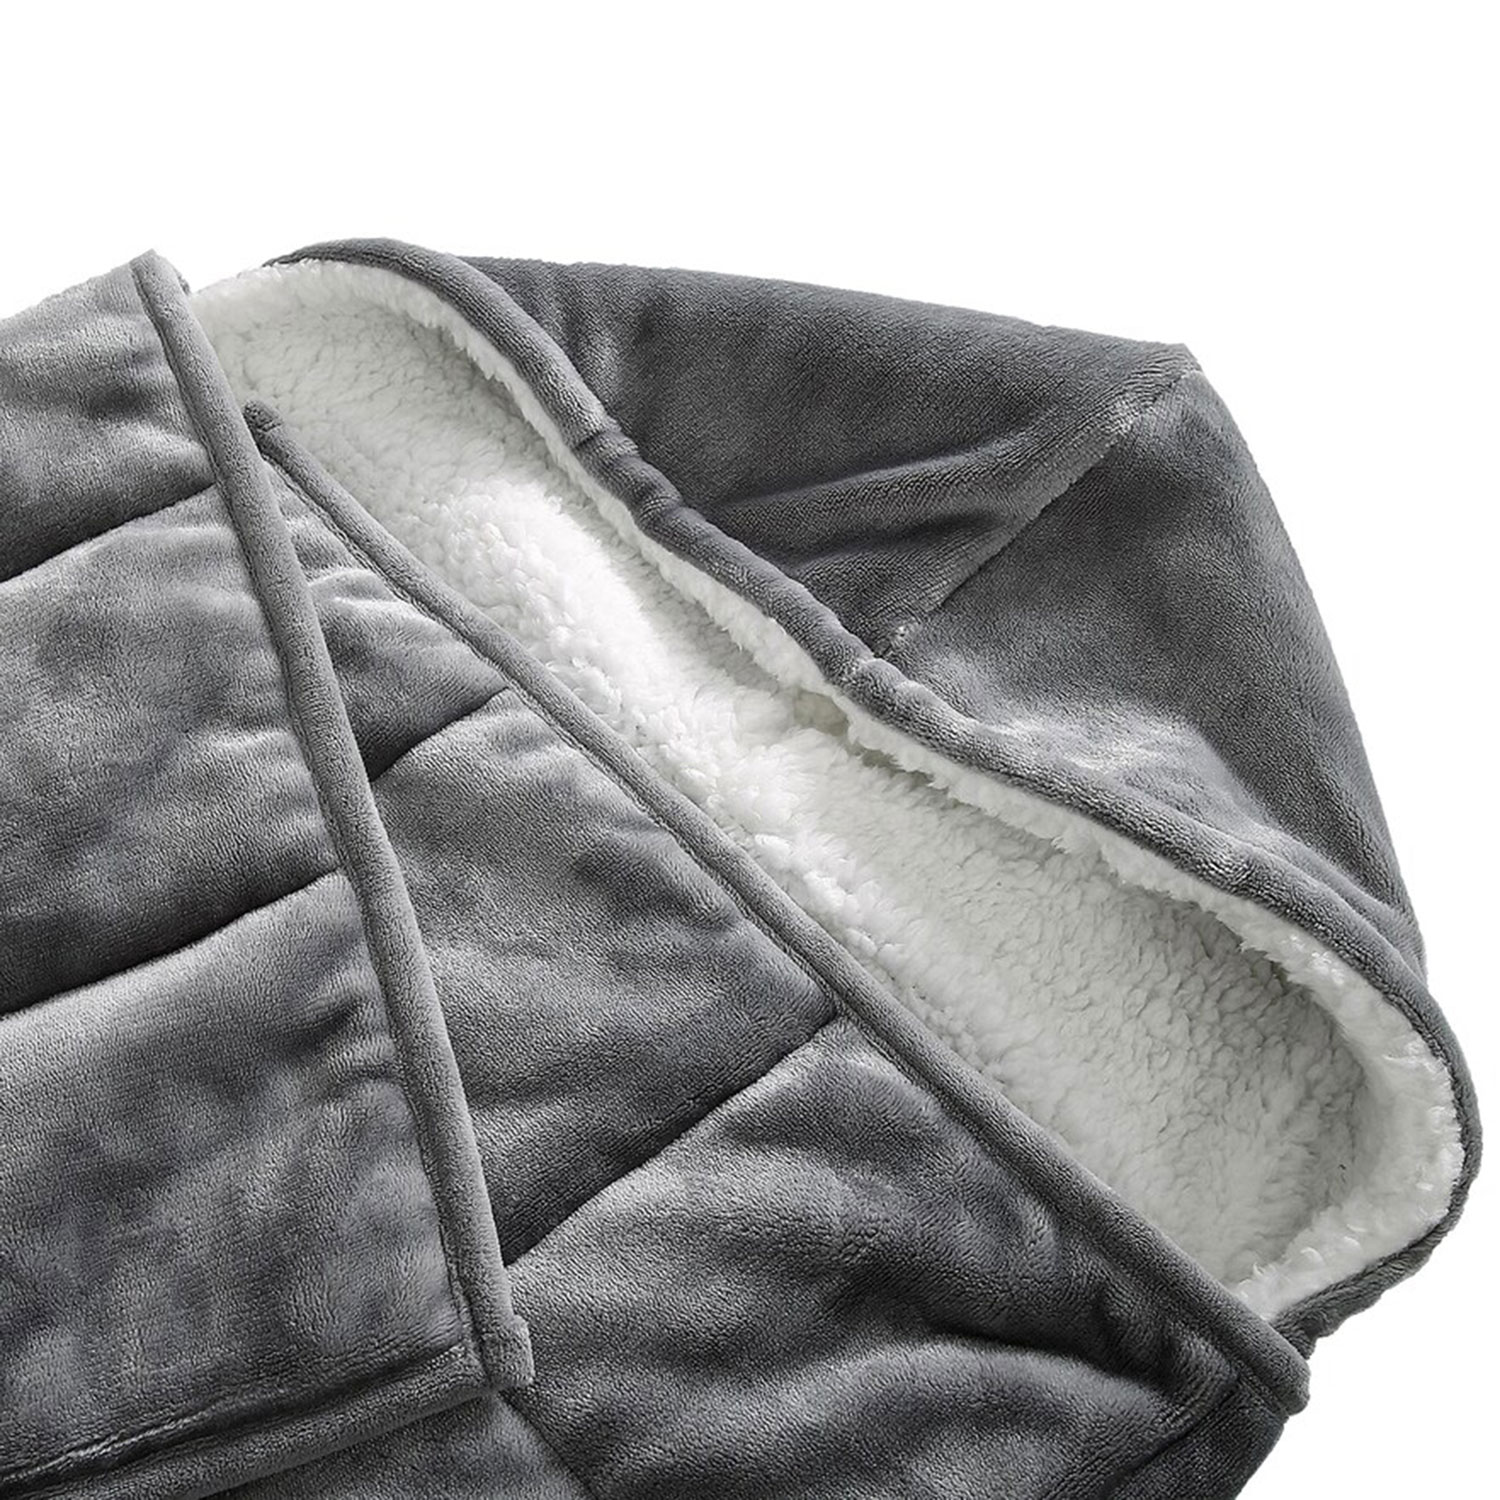 Weighted Blanket with Hood, 10 lb Velvet Throw with Sherpa Fleece